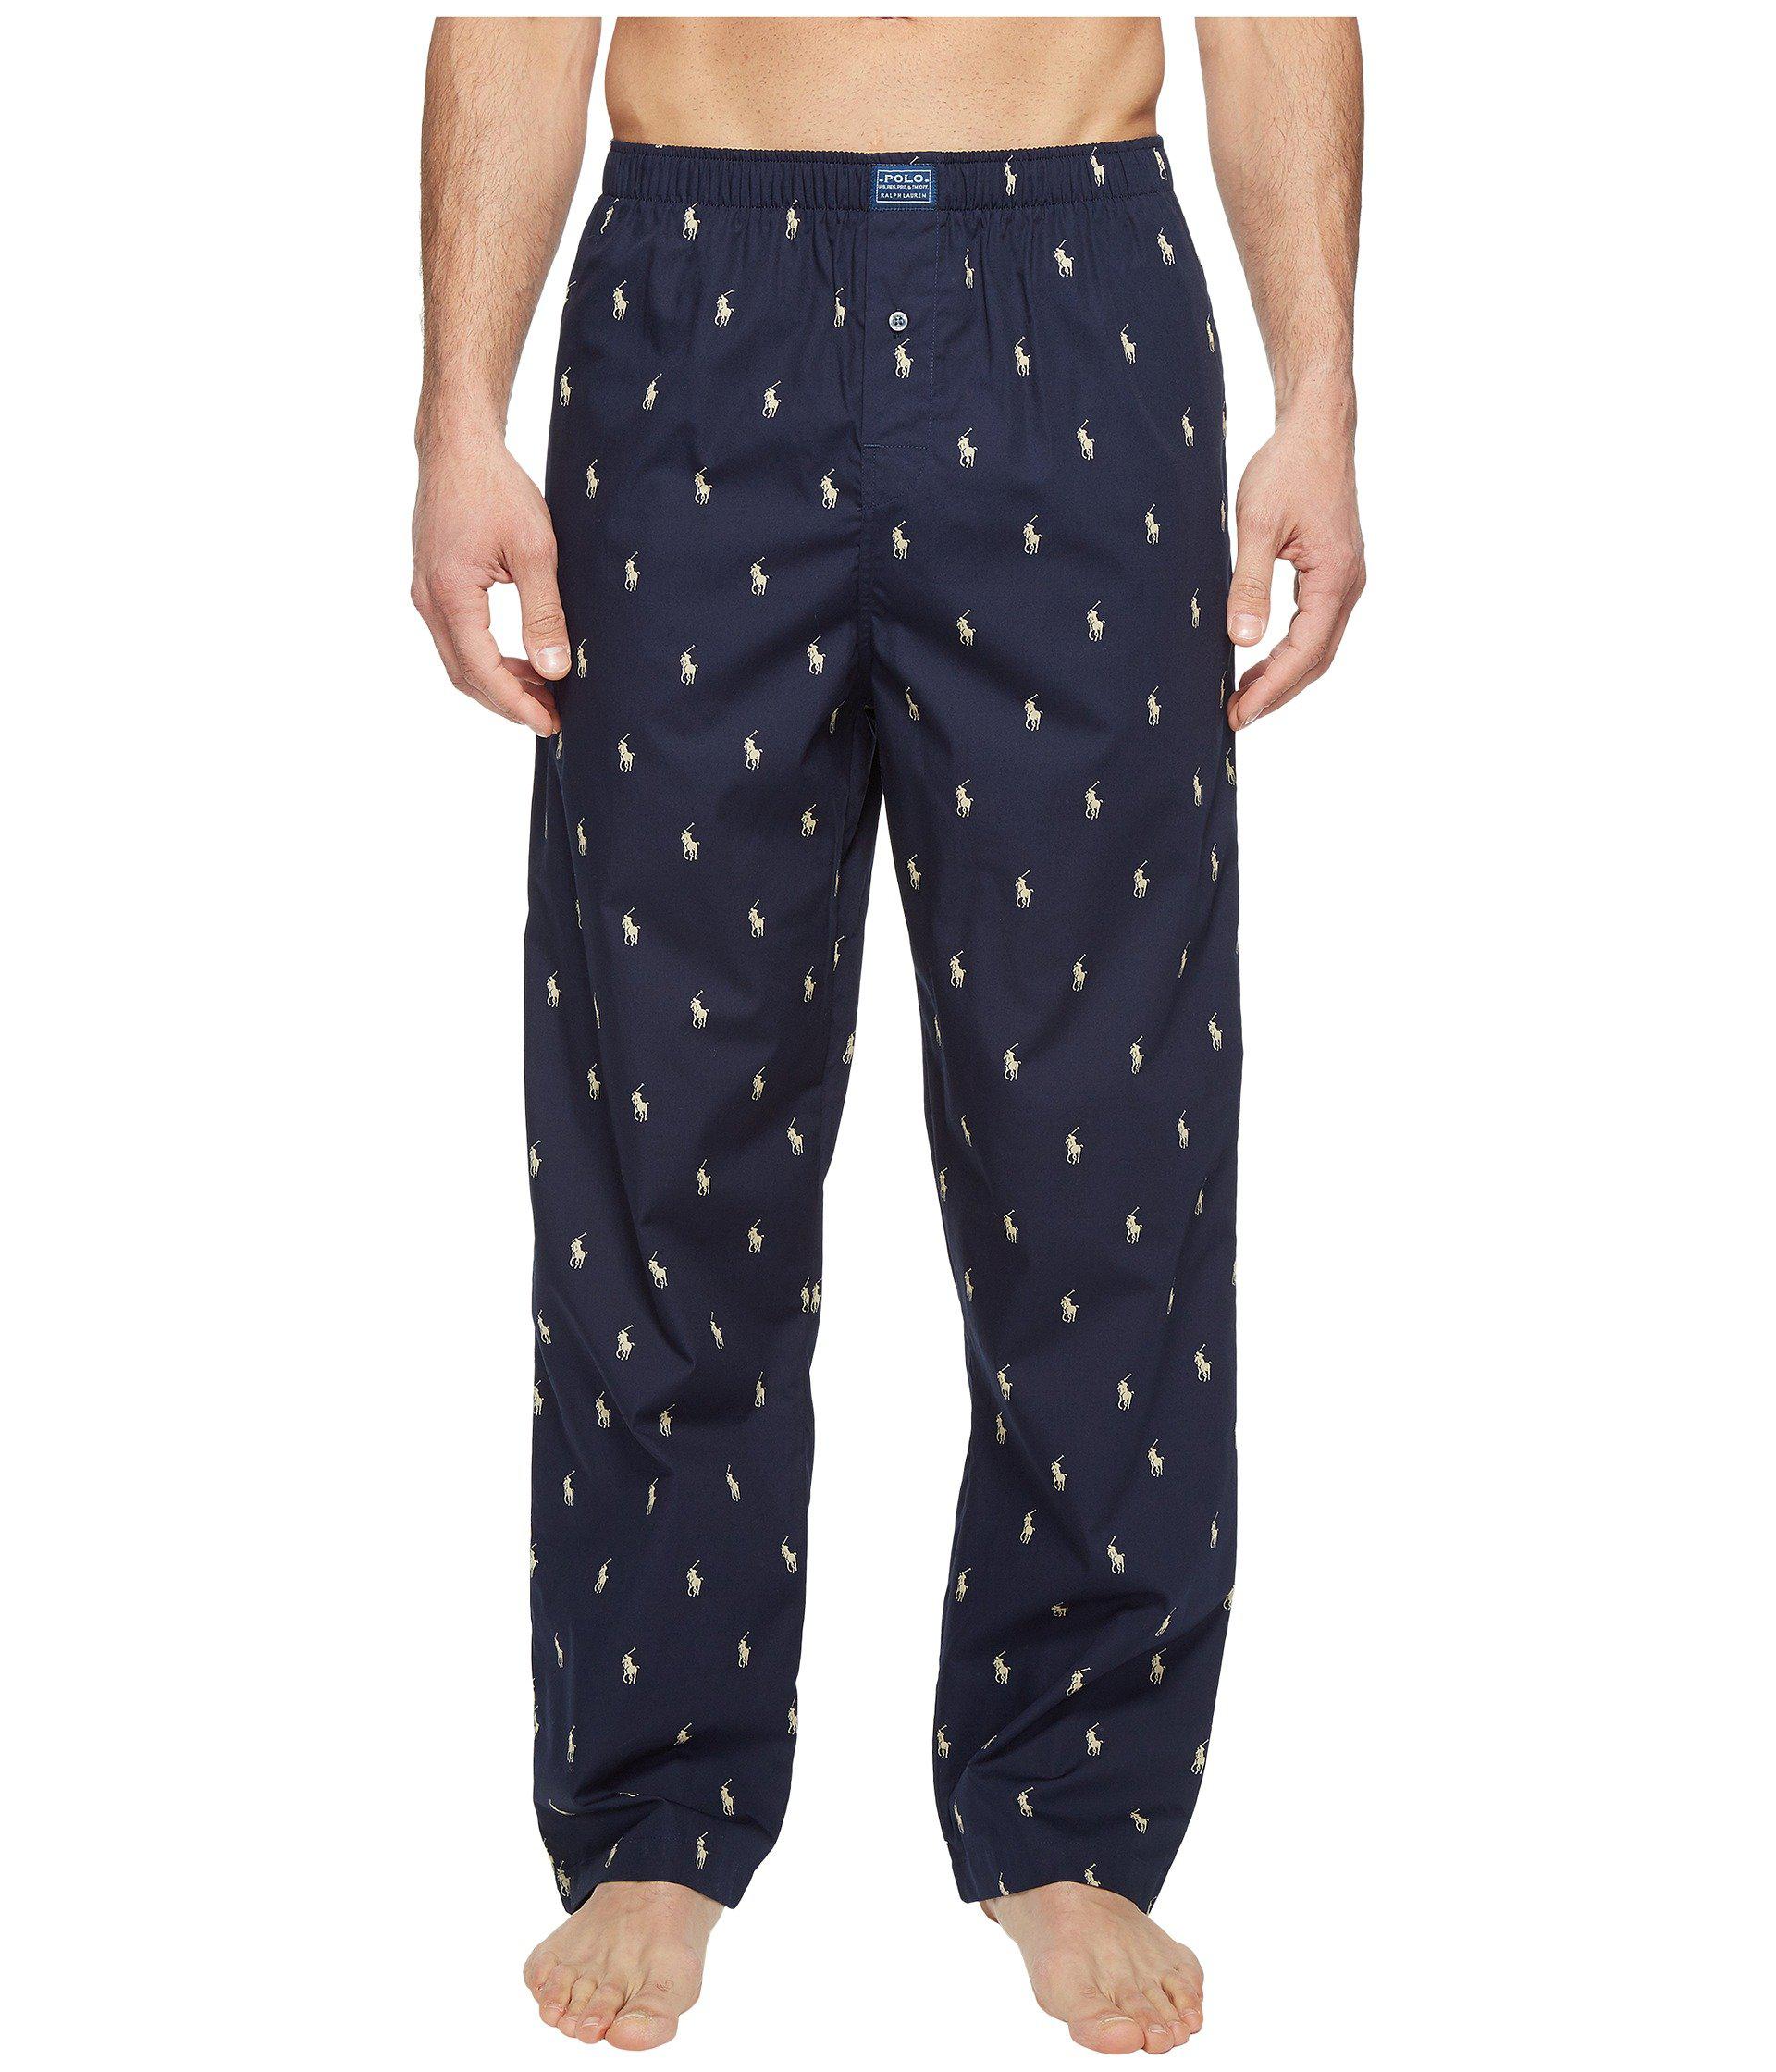 Lyst - Polo Ralph Lauren Allover Pony Sleep Pant in Blue for Men - Save ...